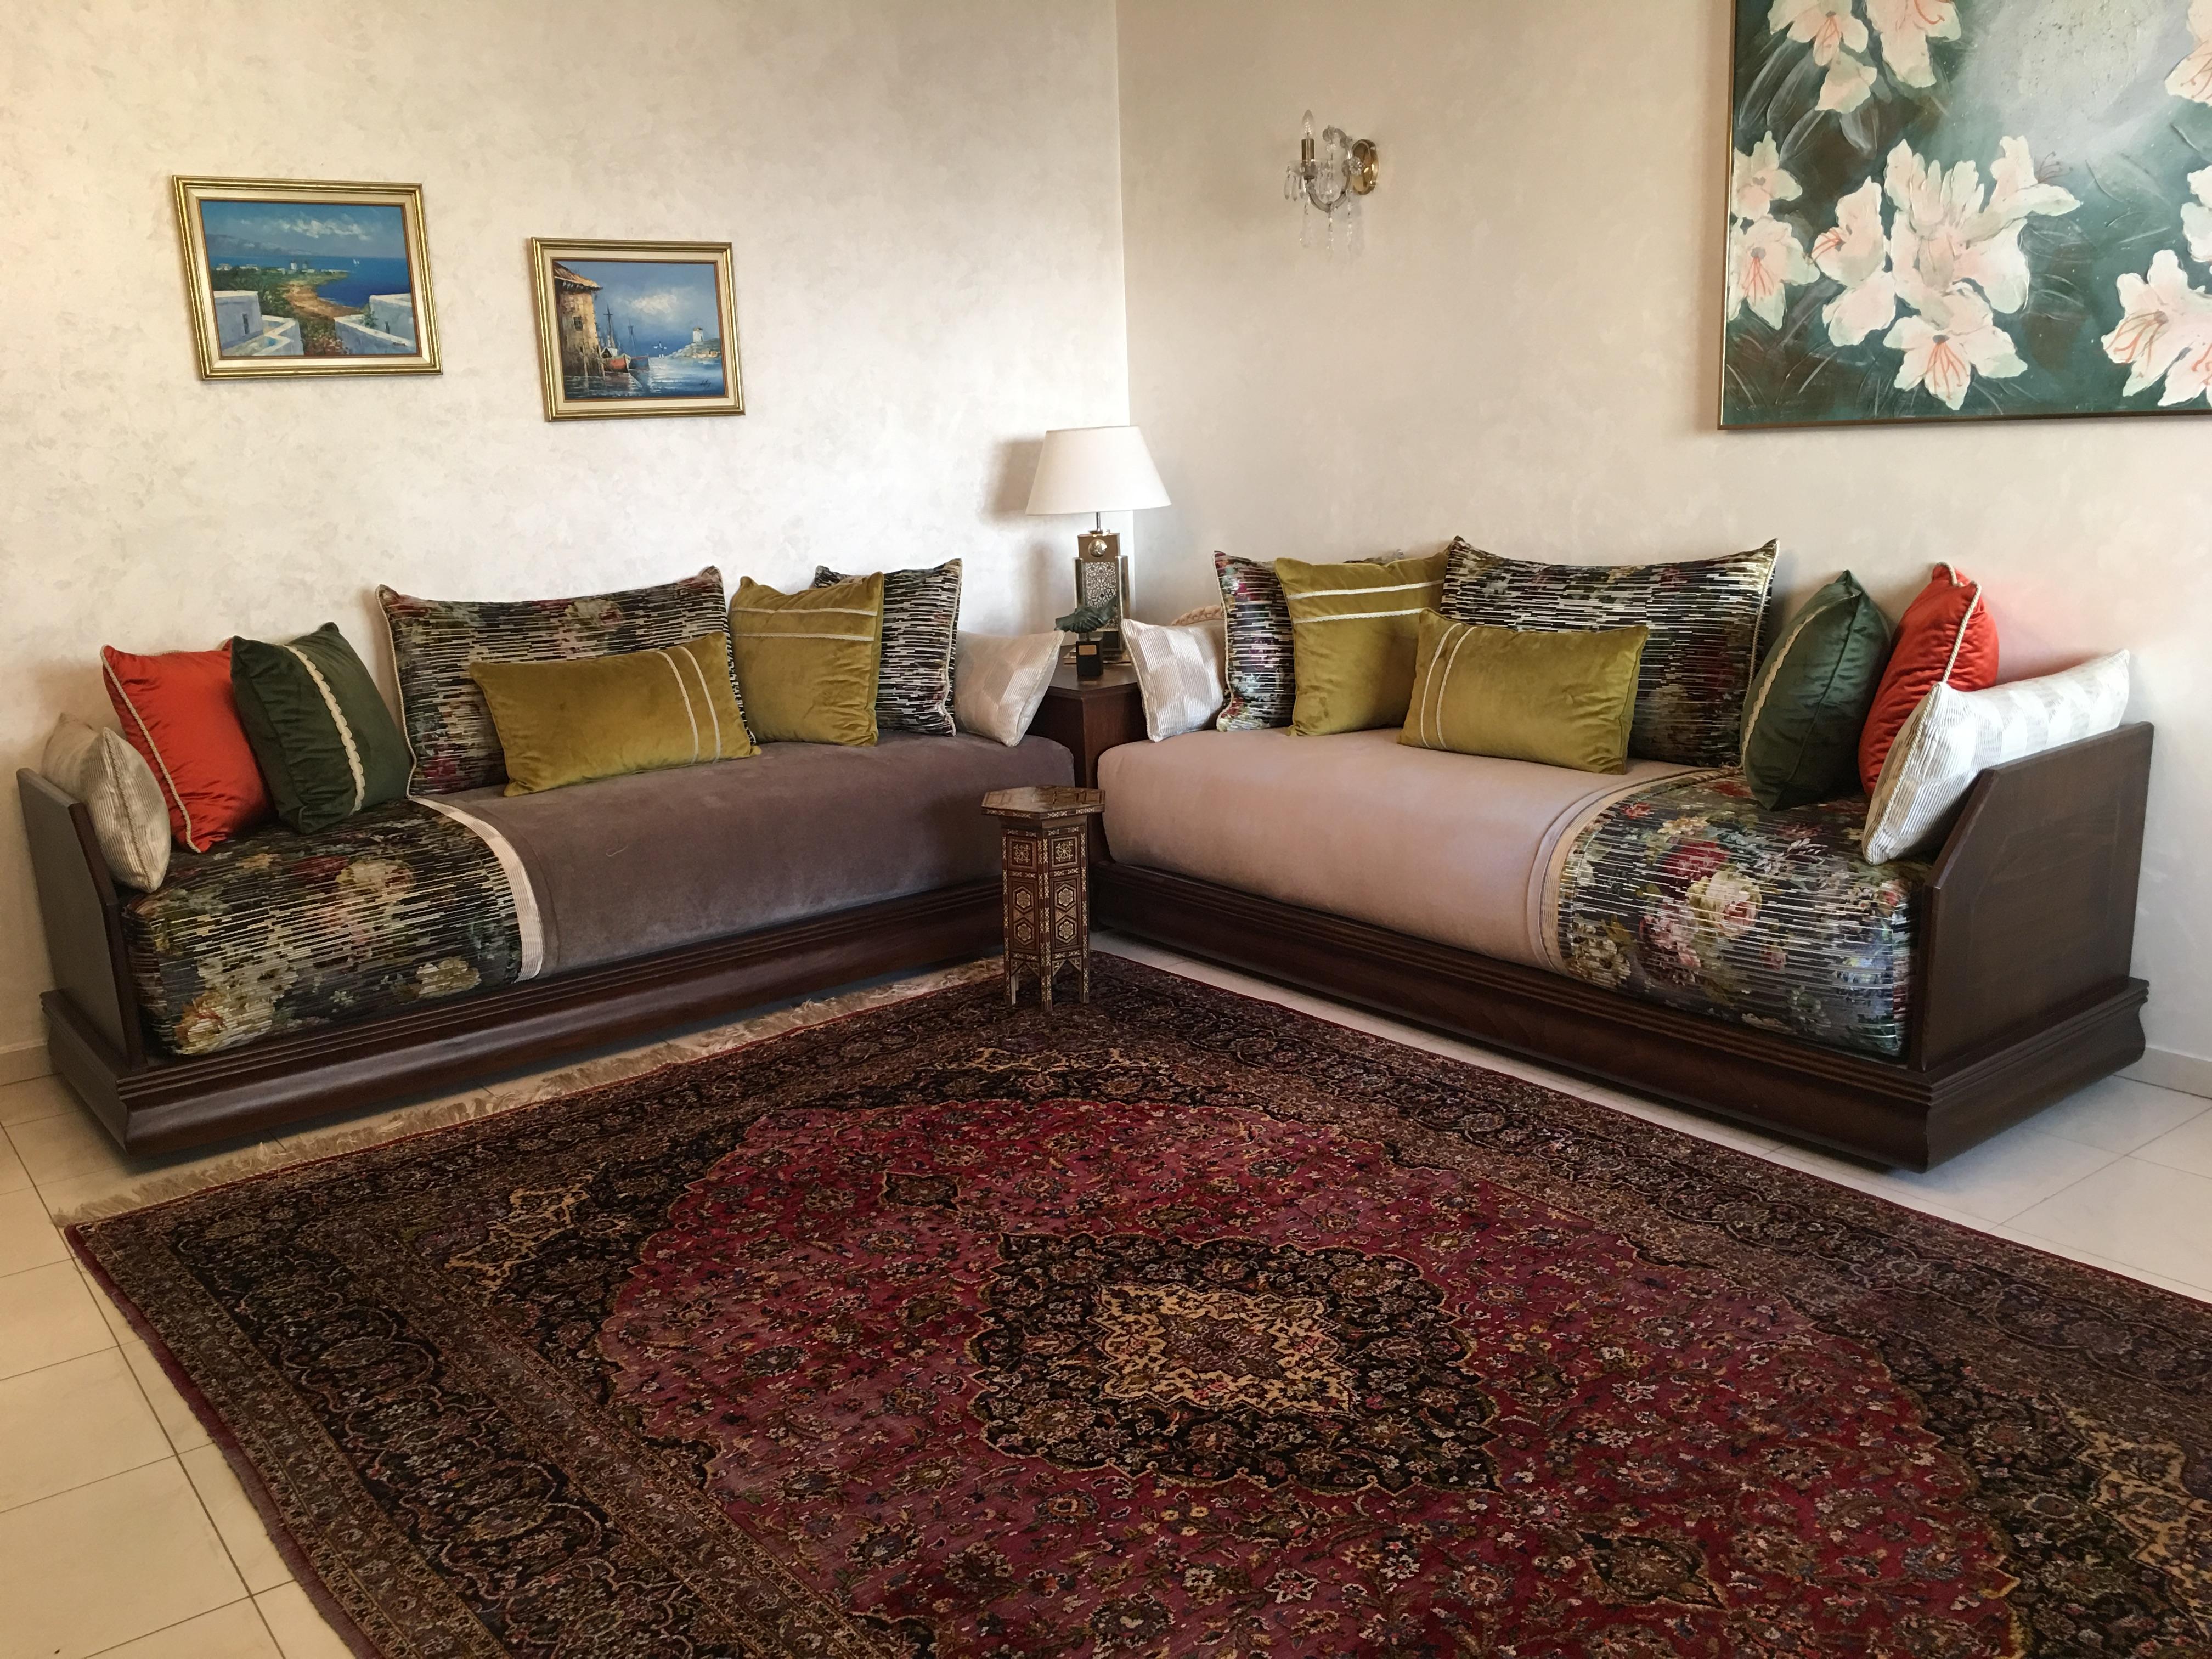 Harmonious color scheme. A stunning collection of top of the line fabrics. What a beautifully adorned 3 piece Moroccan living room set!
Each sofa measures approximately 87